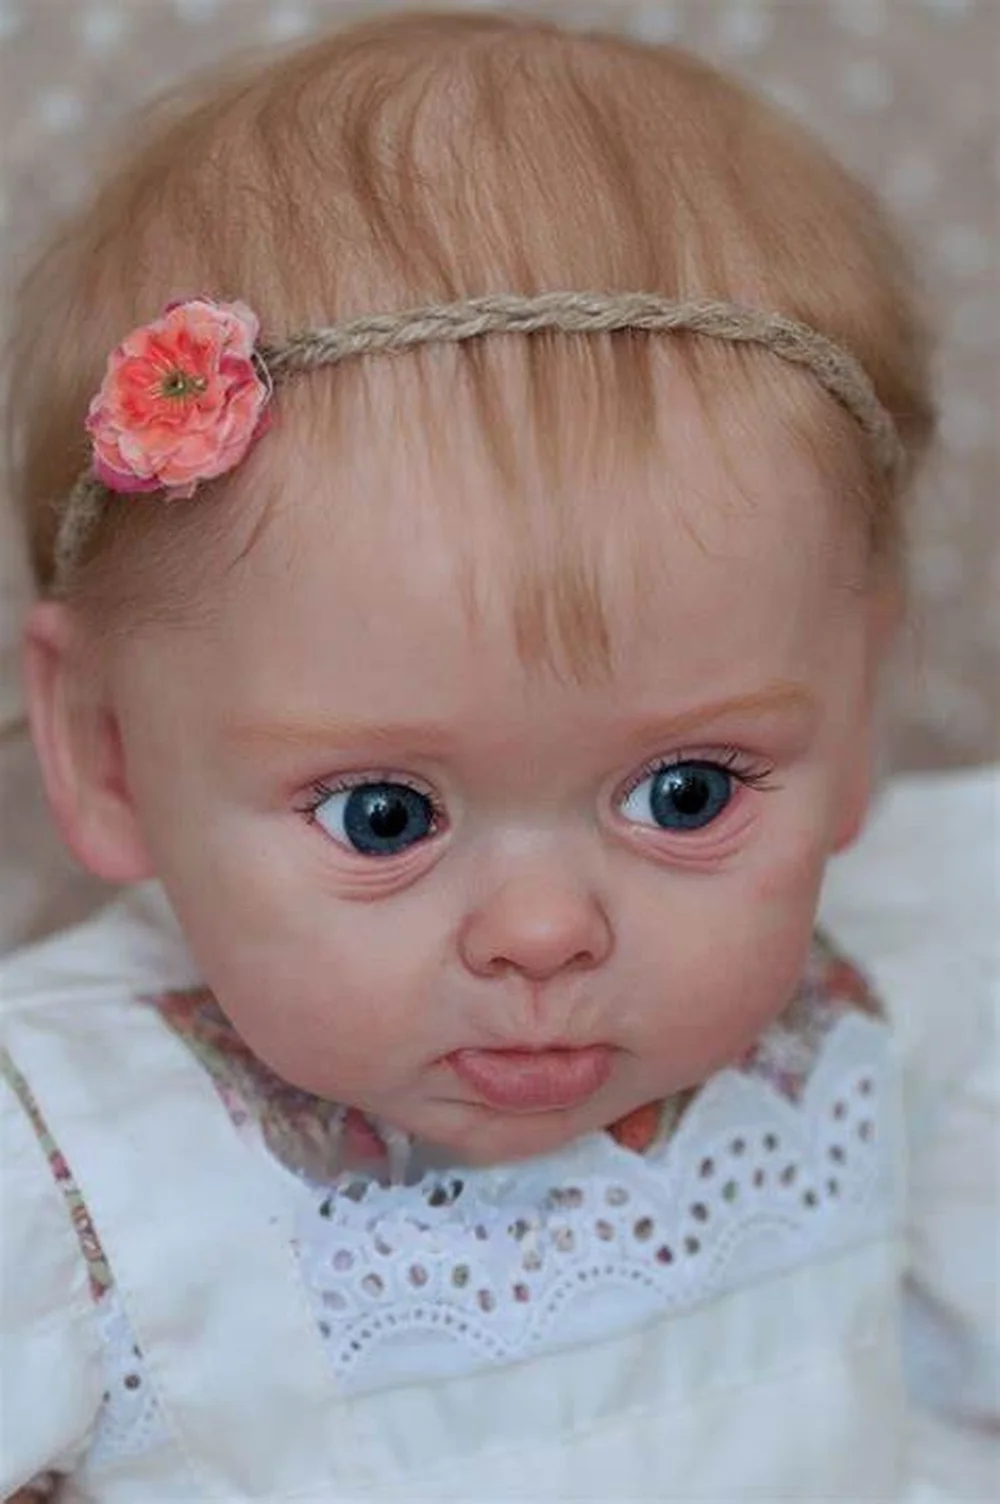 

24inch Reborn Doll Kit Princess Adelaide Toddler Size Limited Edition Unfinished Unpainted Doll Parts with Body and Eyes